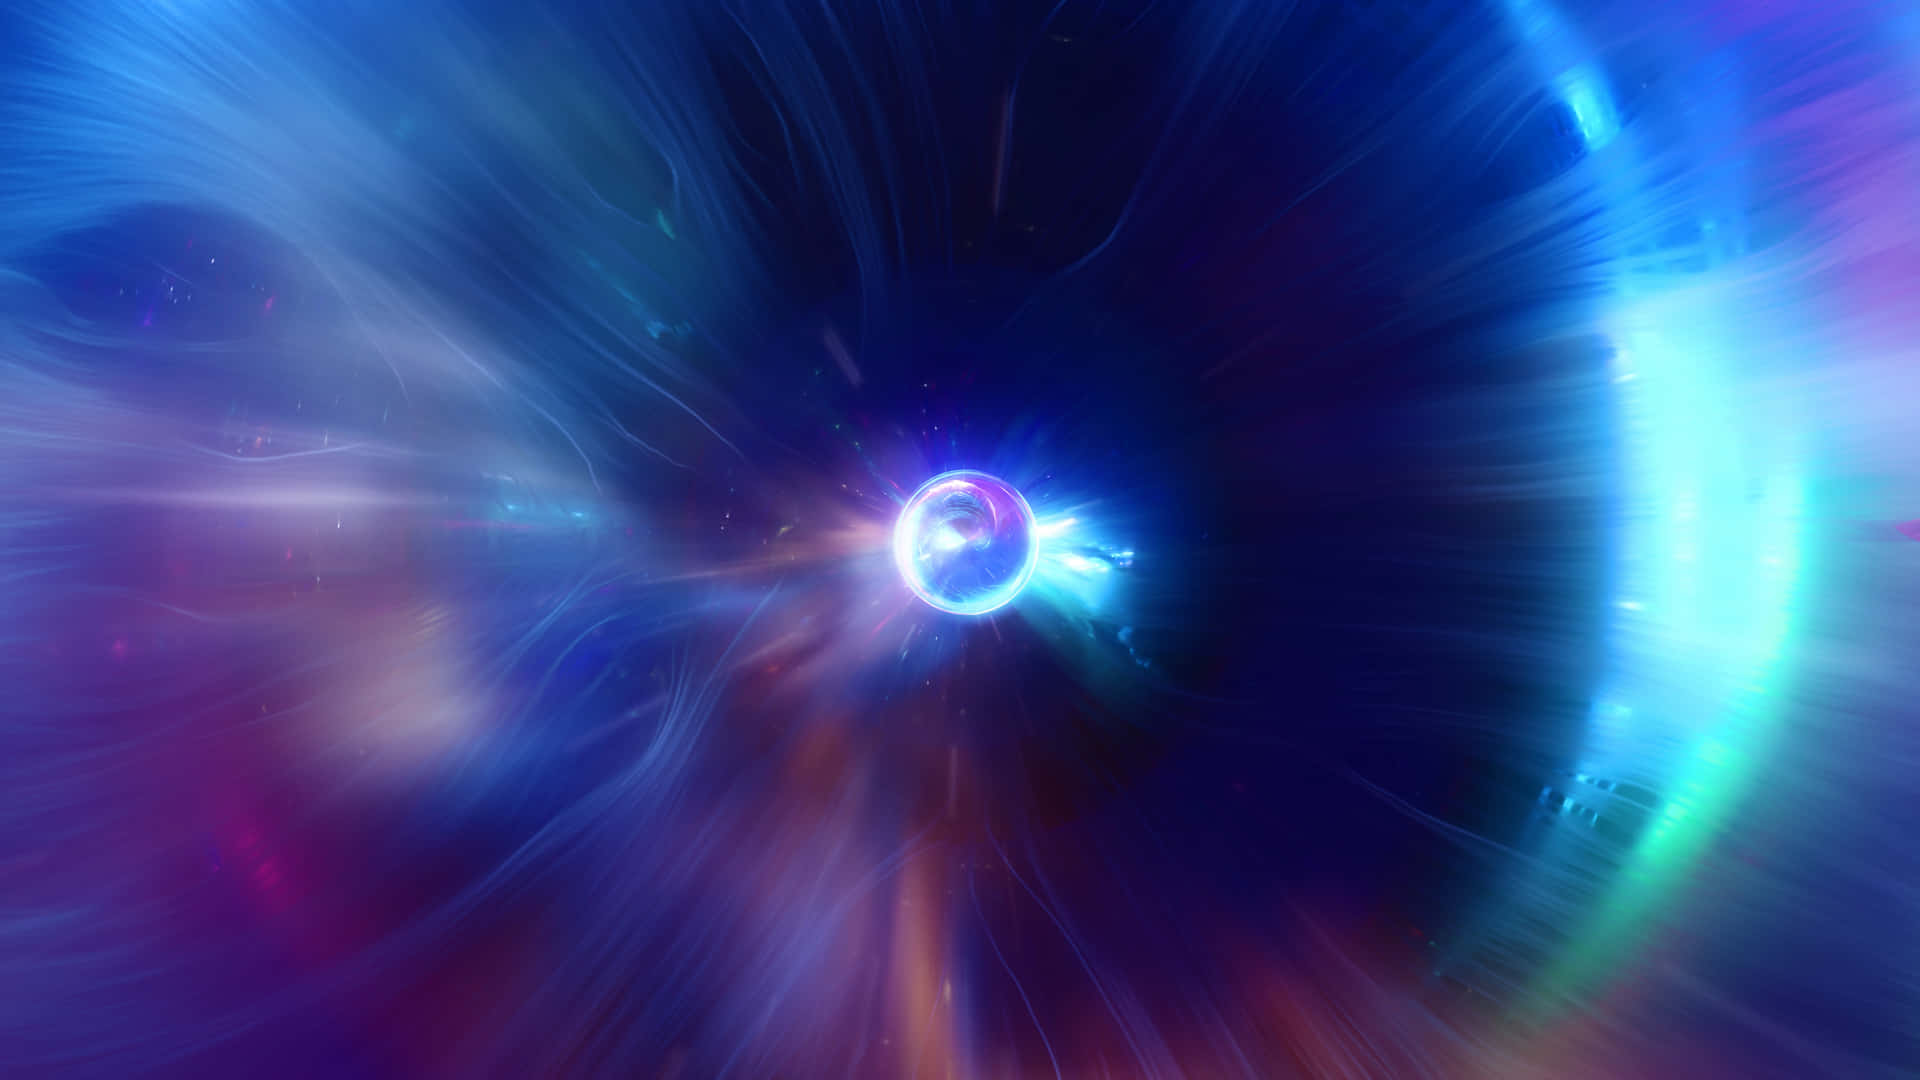 A Blue And Purple Swirling Background